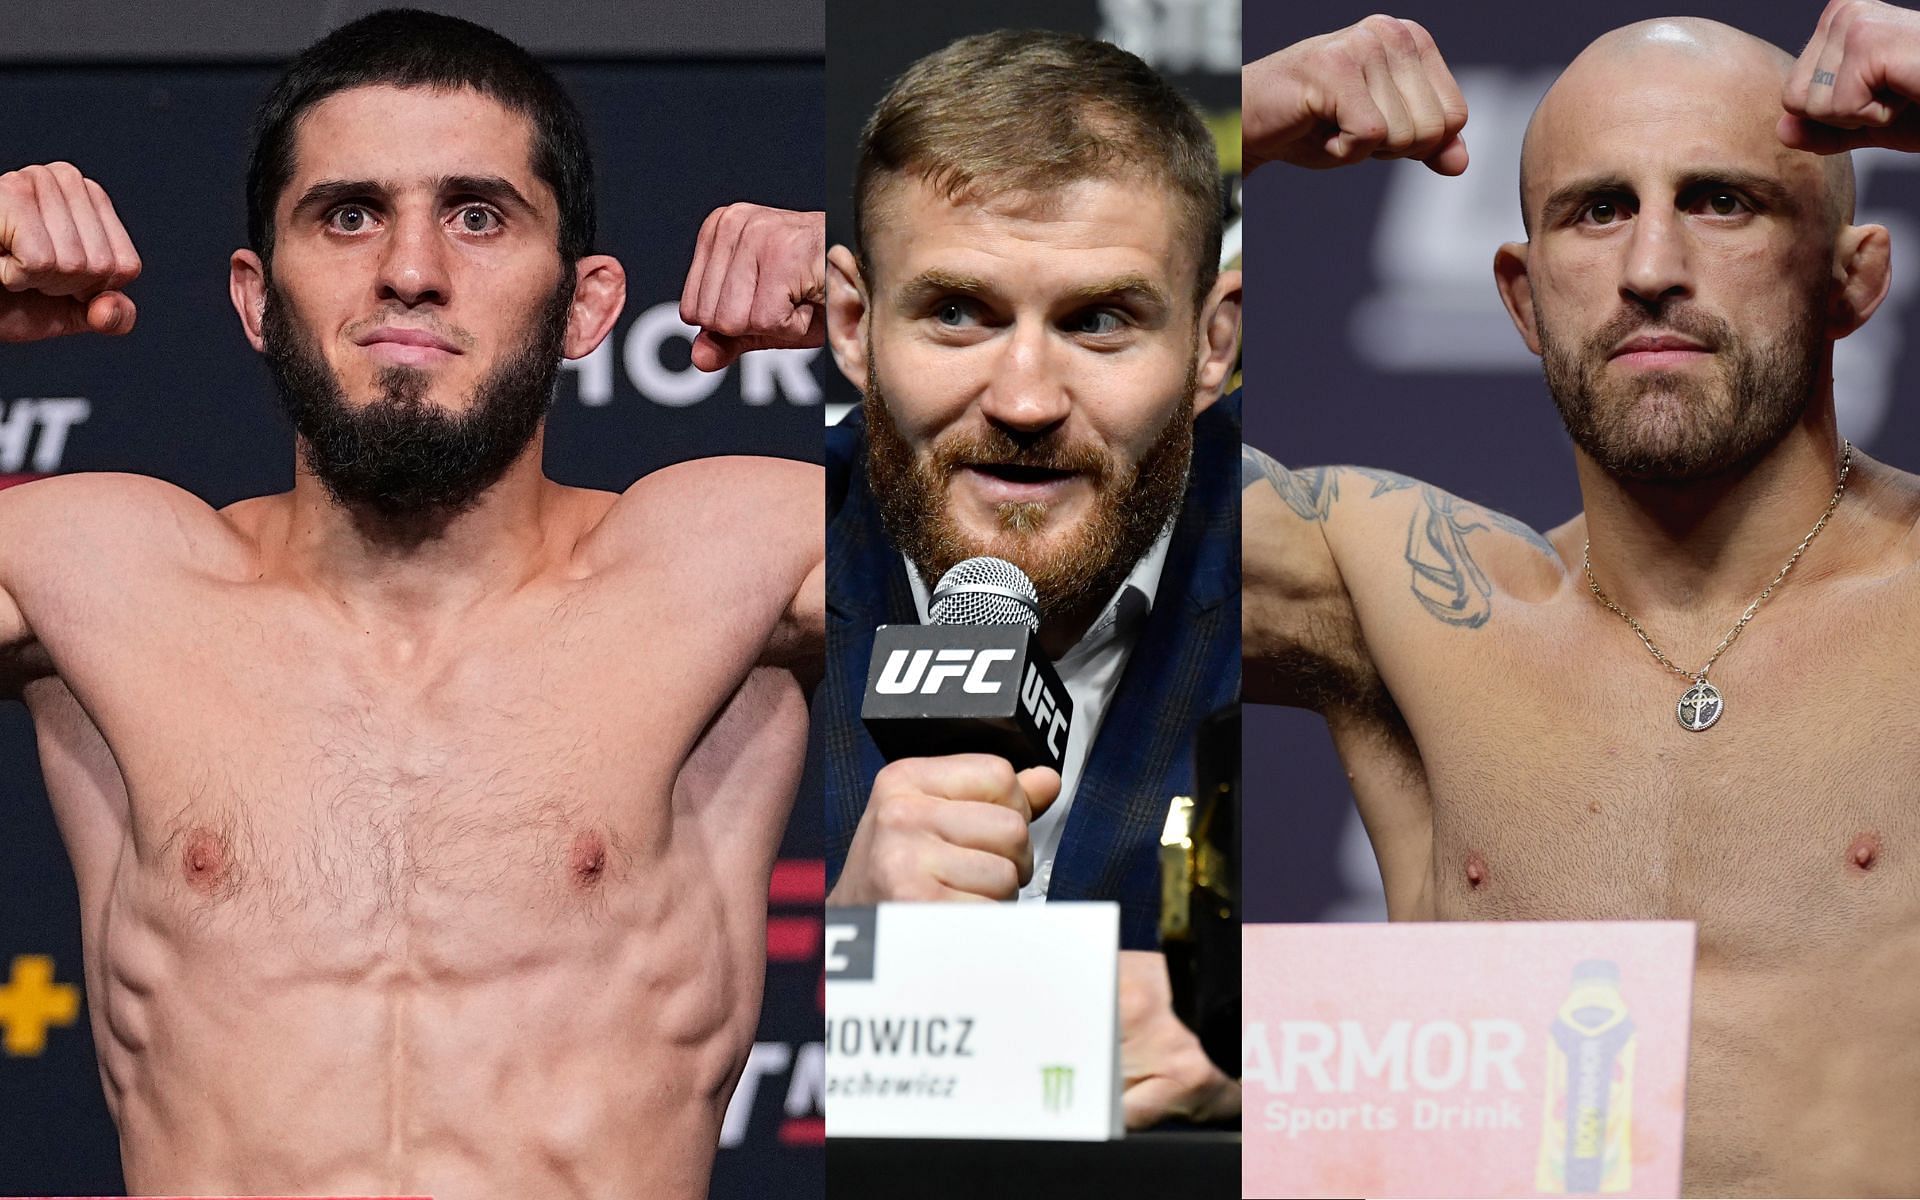 Islam Makhachev (left), Jan Blachowicz (center), and Alexander Volkanovski (right). [Images courtesy: Getty Images]